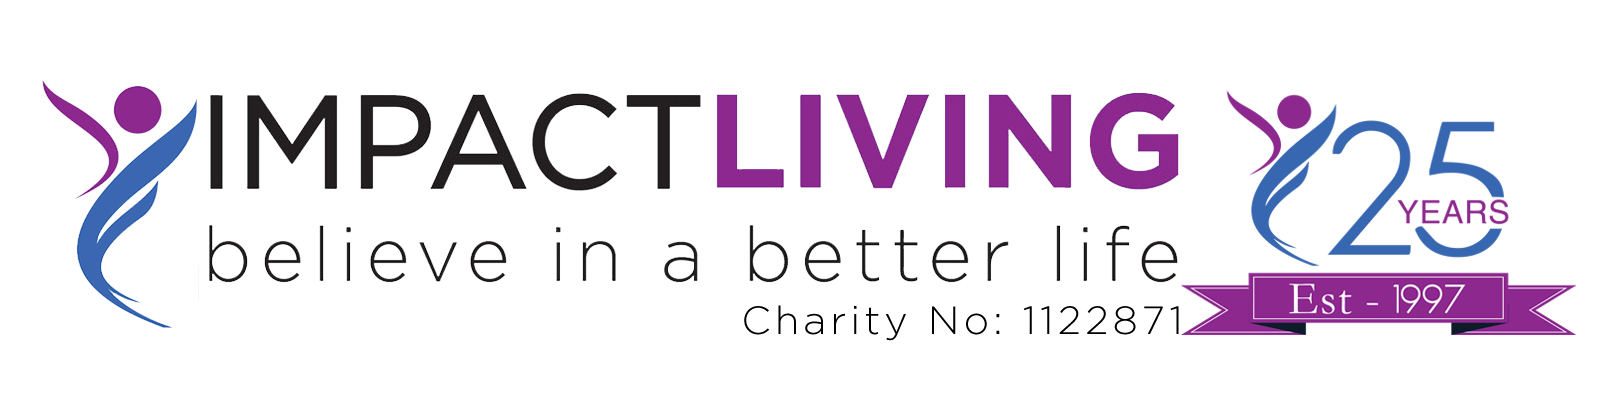 Impact Living - Believe in a better life Logo